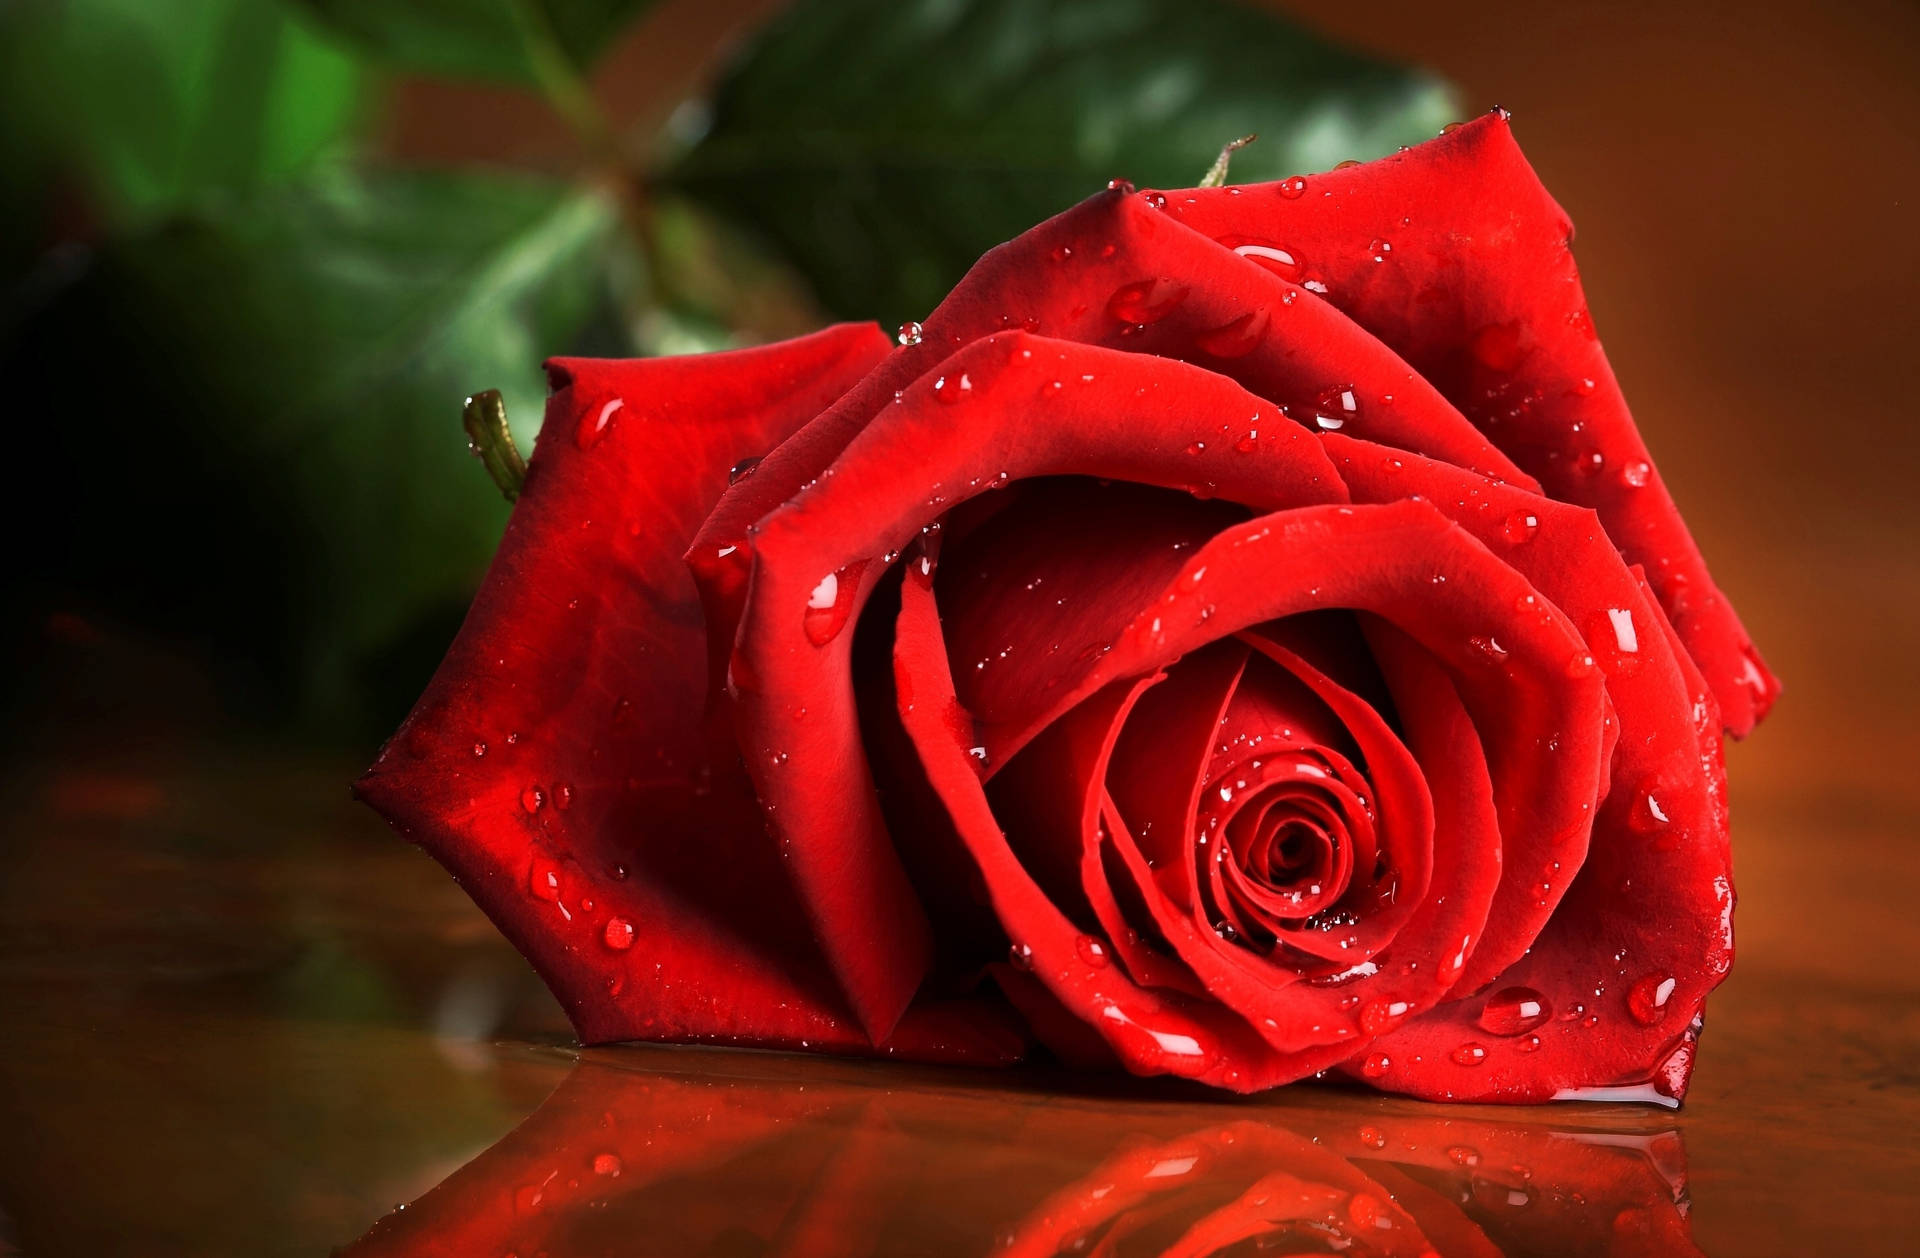 The Beauty of Red - A Dewy Rose Wallpaper